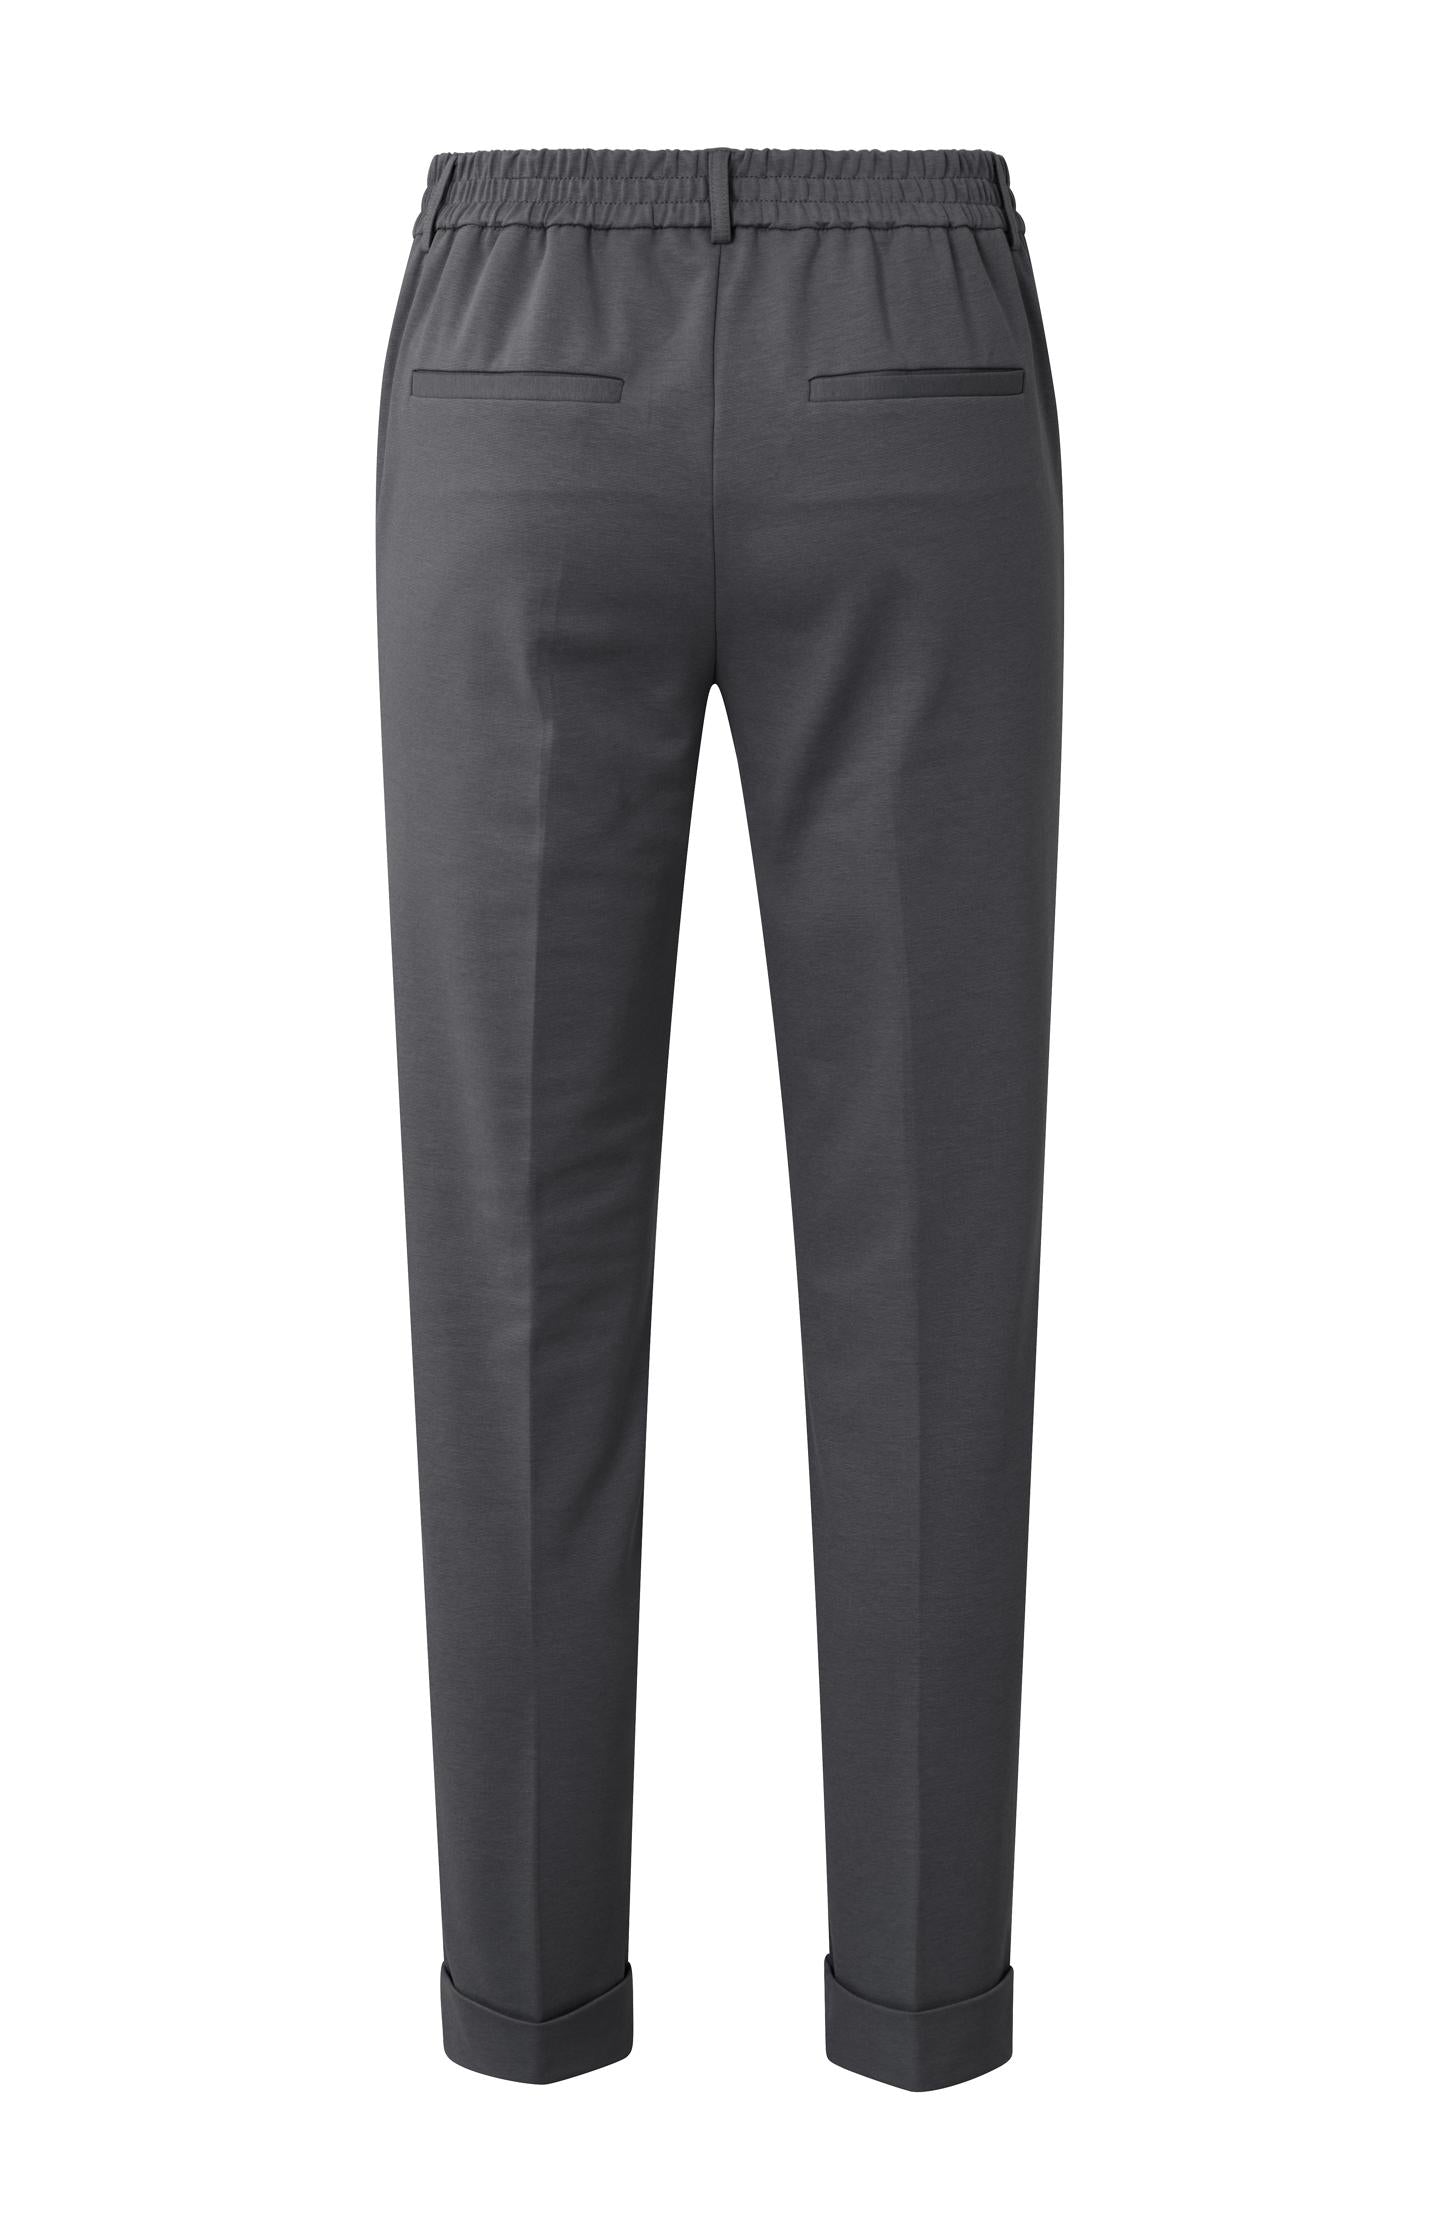 Jersey trousers with straight legs and elastic waistband